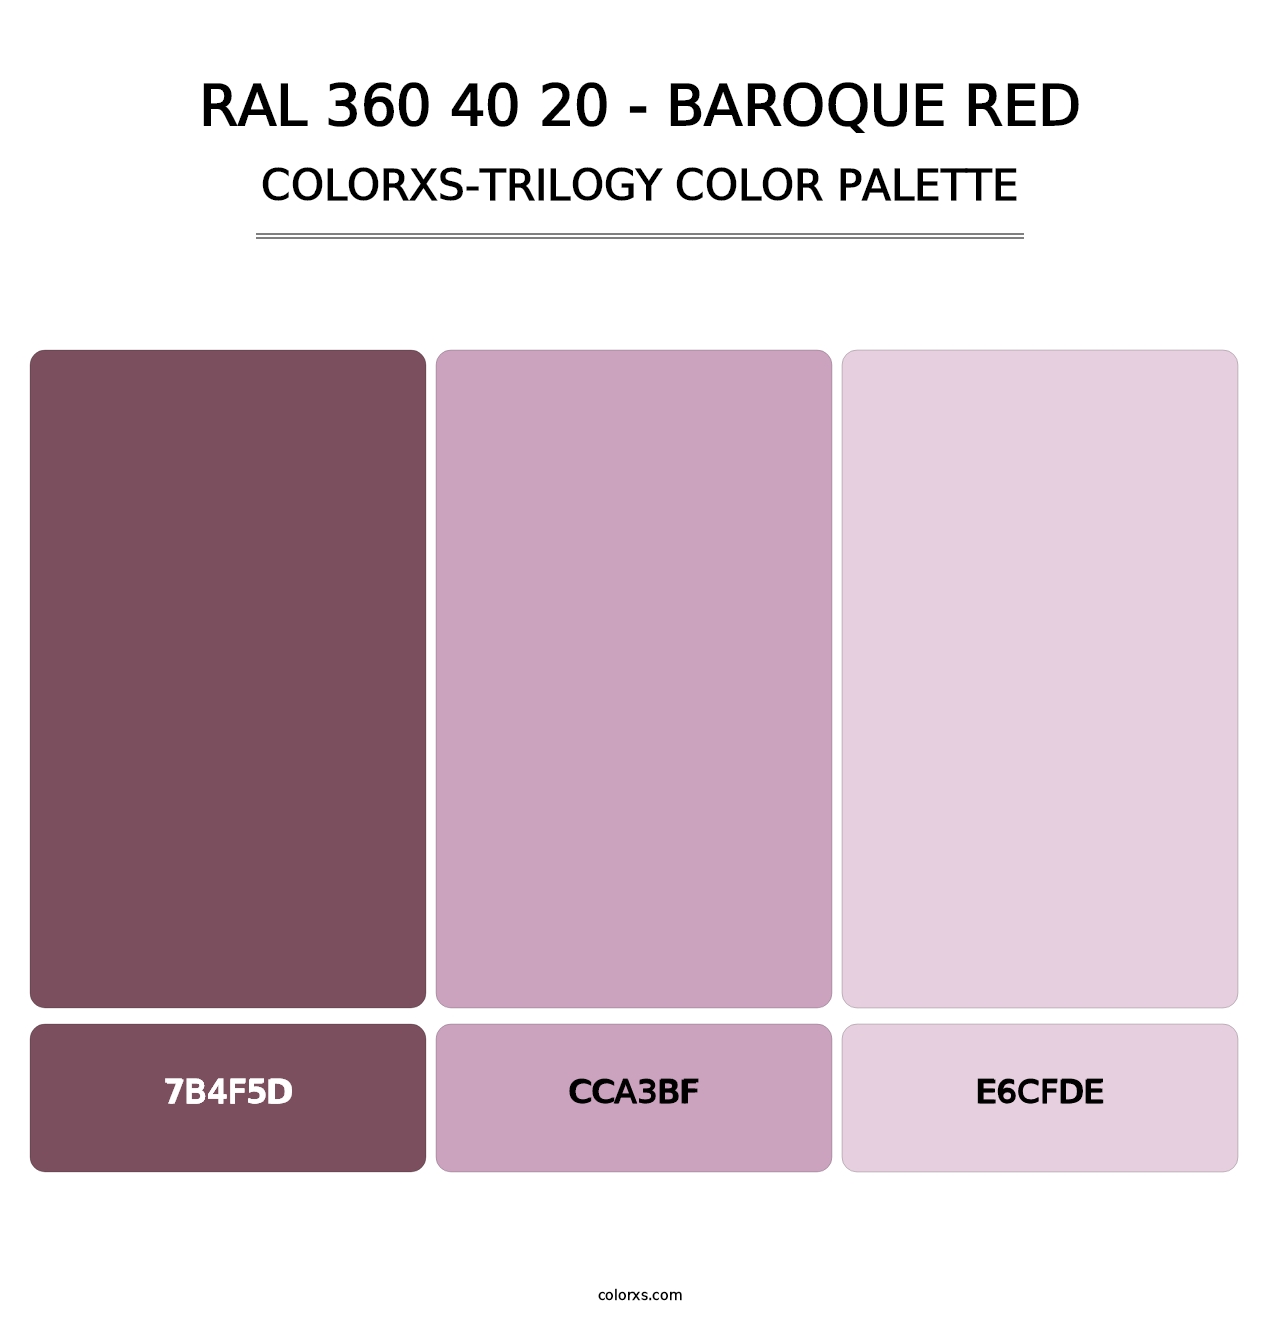 RAL 360 40 20 - Baroque Red - Colorxs Trilogy Palette